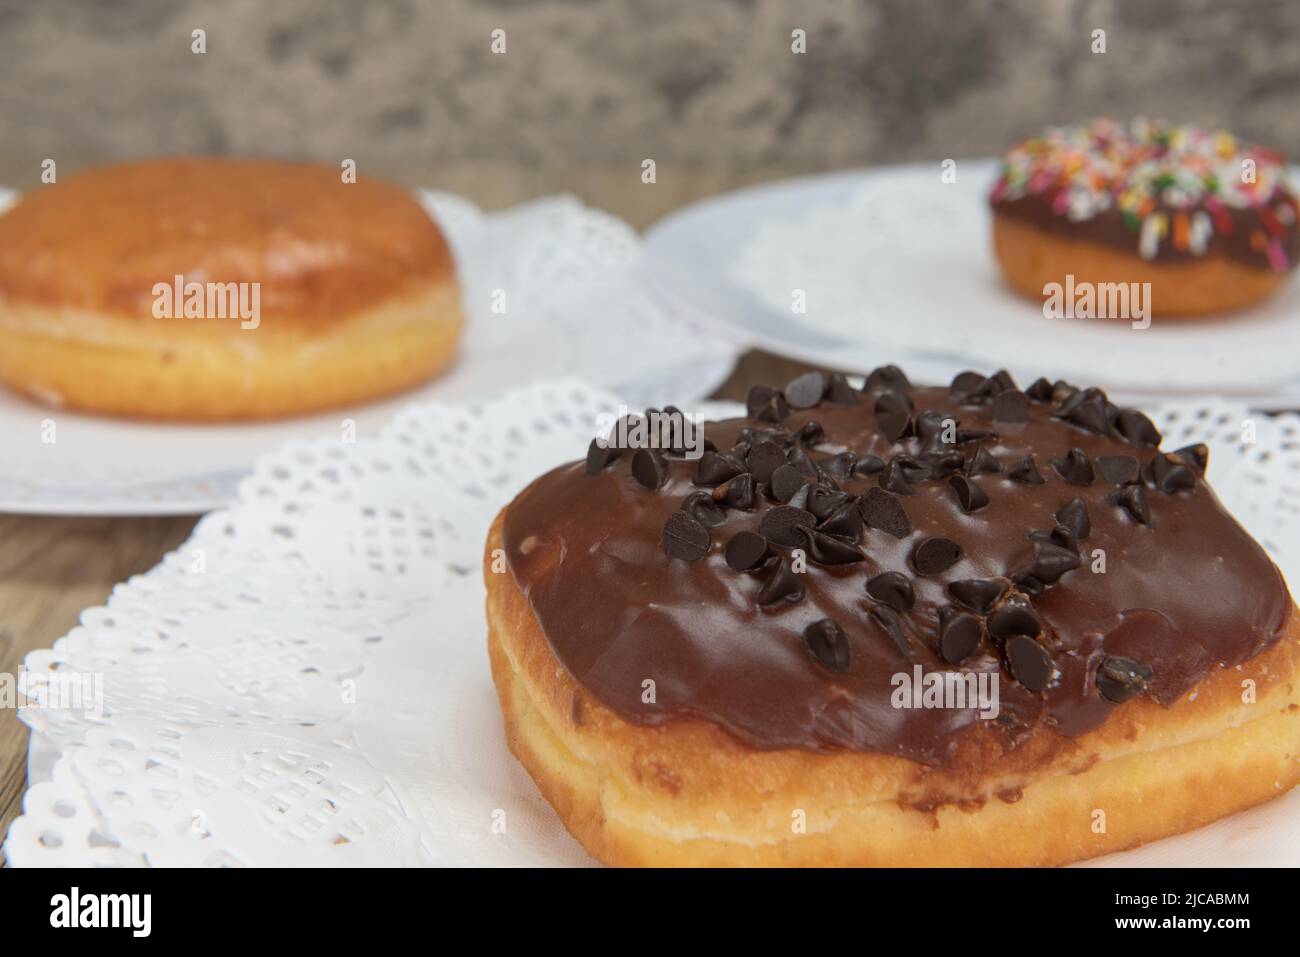 Tempting fresh from the oven buffet of donuts with the chocolate chip donut featured from the bakery served on a plate. Stock Photo